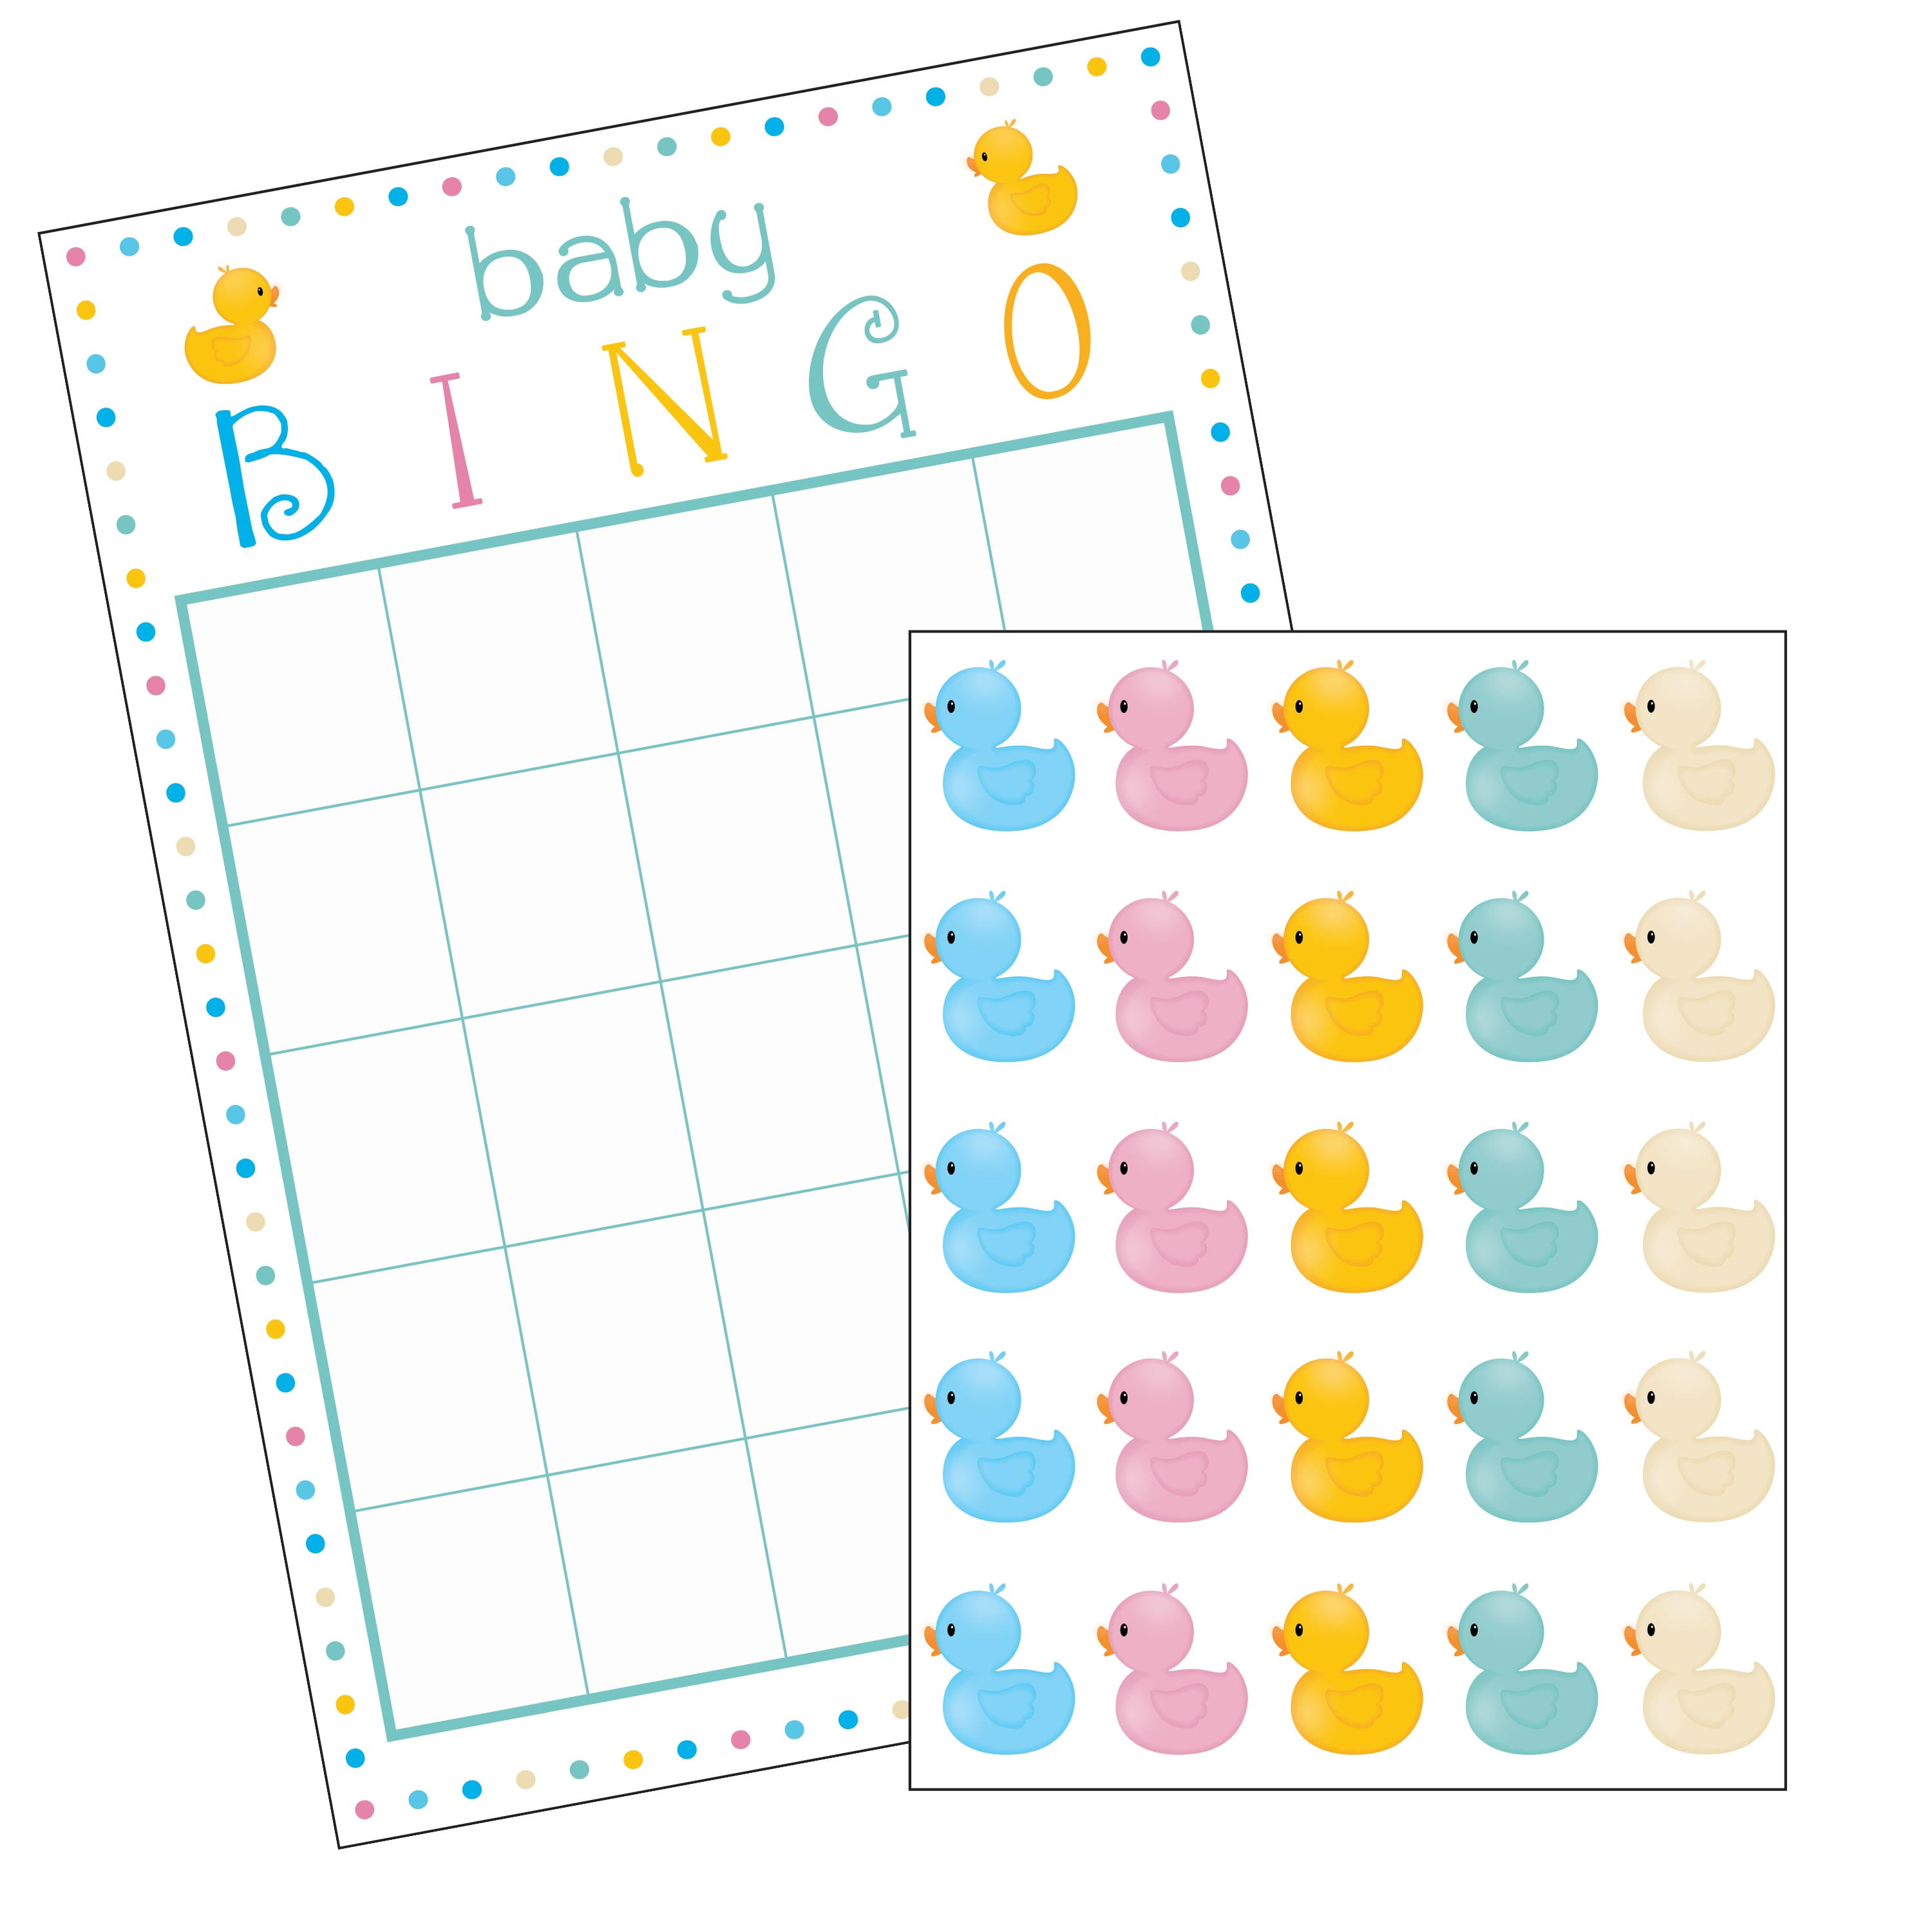 Way to Celebrate! Baby Shower Bingo Game, 10 Ct., Multi-Color